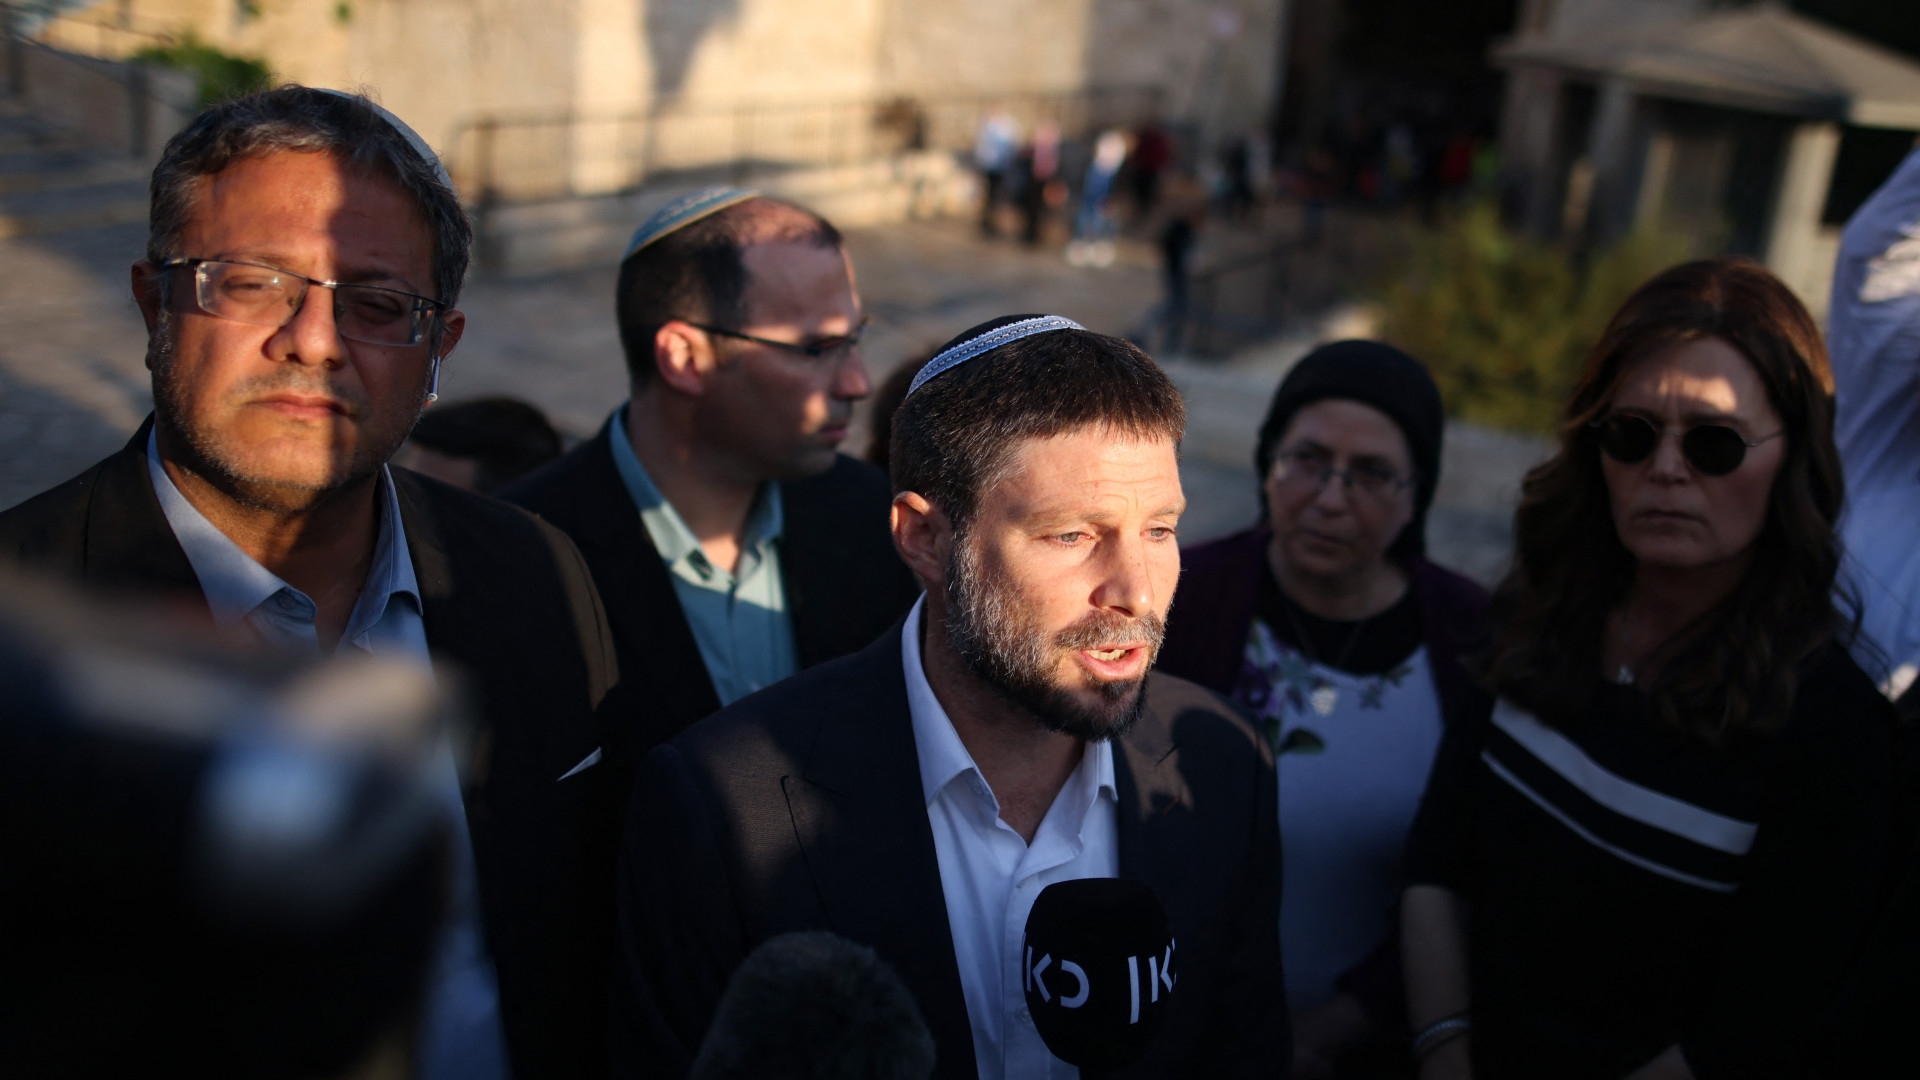 Member of the Knesset (Israel's parliament) from Religious Zionism parties, Bezalel Smotrich speaks to a journalist as fellow Knesset member Itamar Ben Gvir (L) looks on, outside the Damascus Gate in Jerusalem, on 20 October, 2021 (AFP)